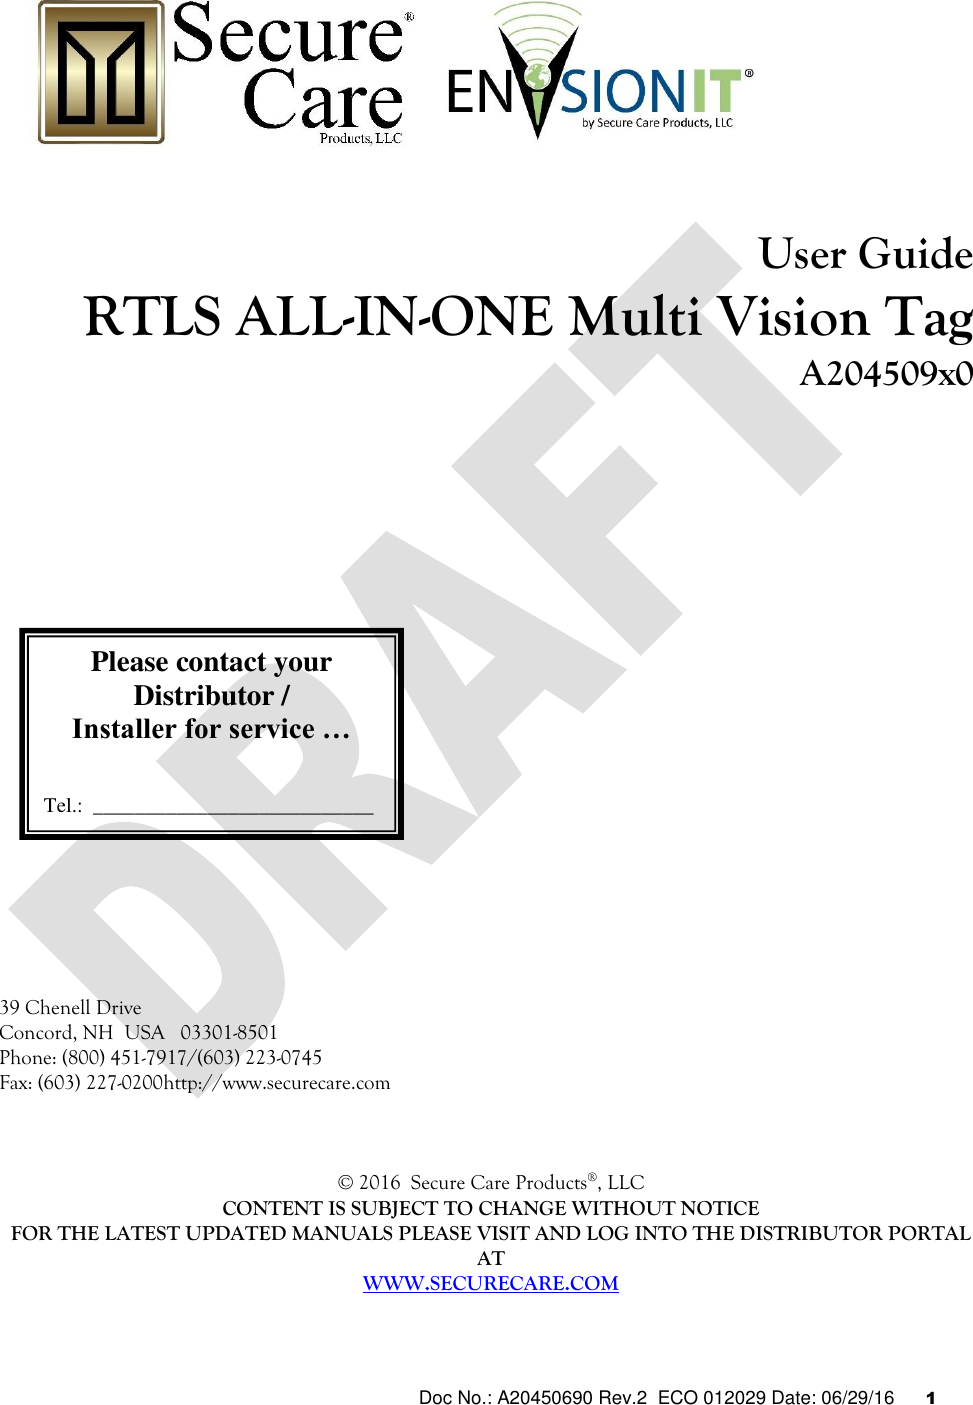  Doc No.: A20450690 Rev.2  ECO 012029 Date: 06/29/16      1           User Guide  RTLS ALL-IN-ONE Multi Vision Tag A204509x0                         39 Chenell Drive  Concord, NH  USA   03301-8501 Phone: (800) 451-7917/(603) 223-0745 Fax: (603) 227-0200http://www.securecare.com    © 2016  Secure Care Products®, LLC  CONTENT IS SUBJECT TO CHANGE WITHOUT NOTICE FOR THE LATEST UPDATED MANUALS PLEASE VISIT AND LOG INTO THE DISTRIBUTOR PORTAL AT WWW.SECURECARE.COM Please contact your Distributor / Installer for service …   Tel.:  ___________________________  